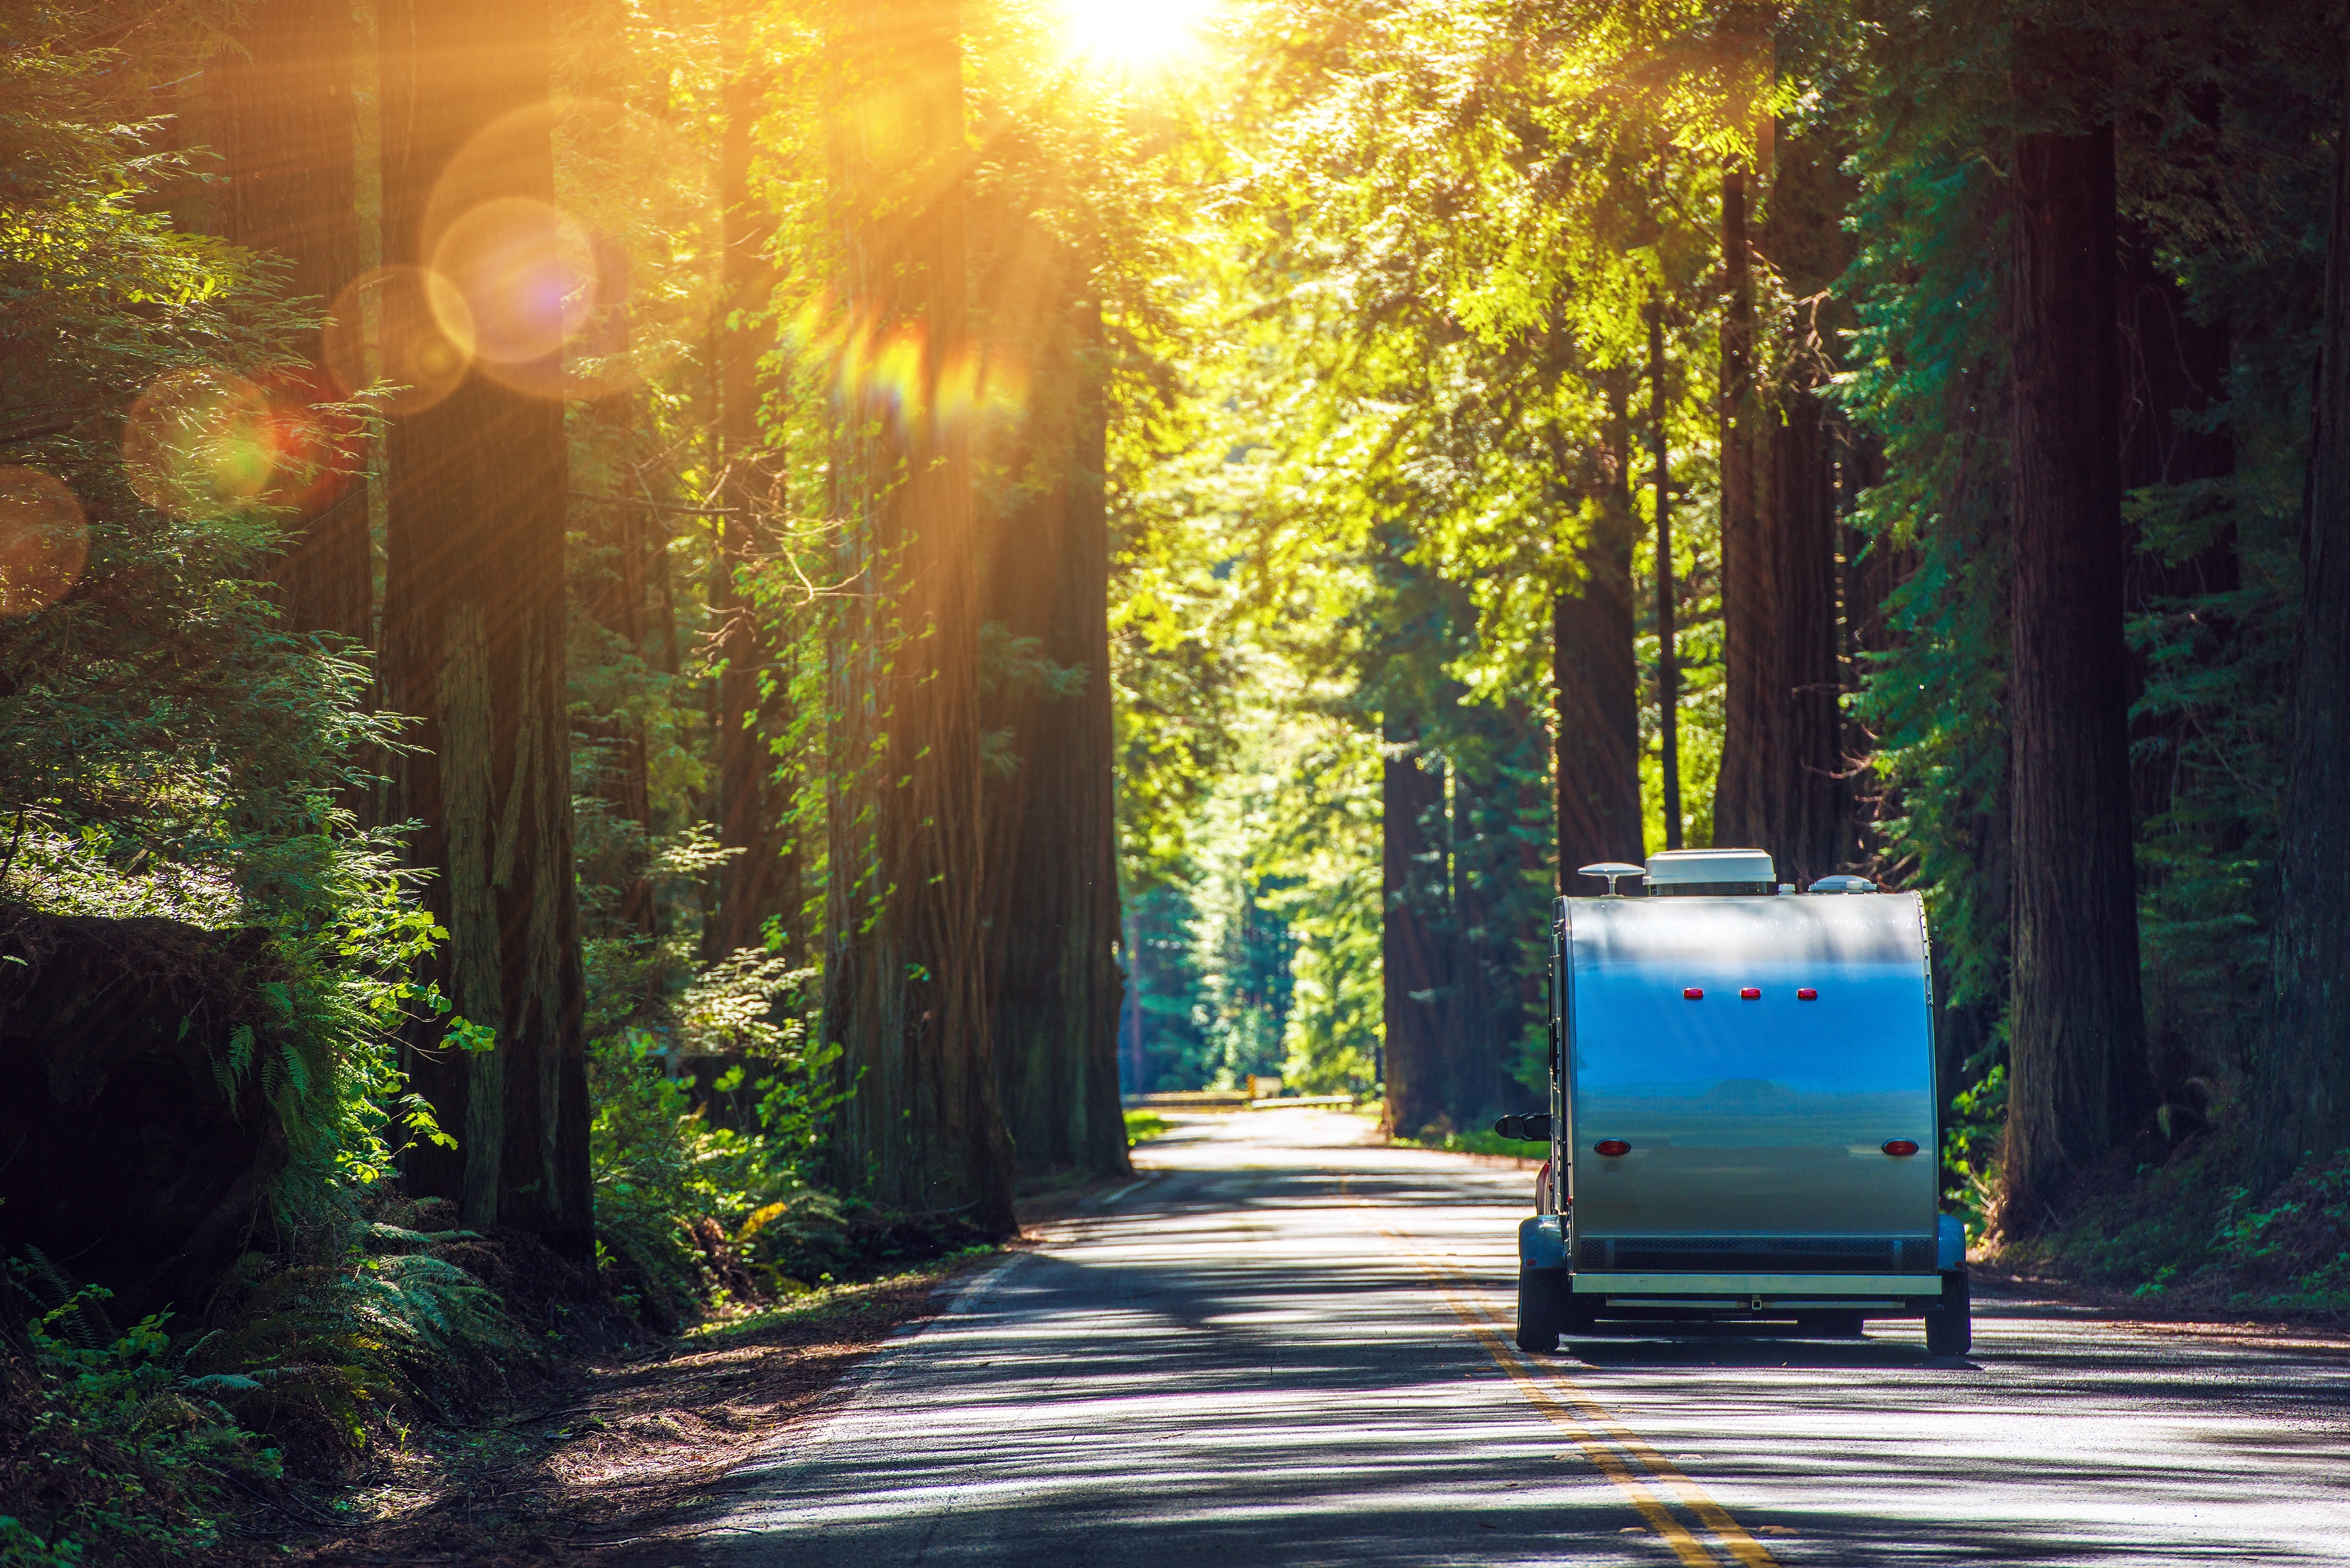 camper-on-road-in-forest